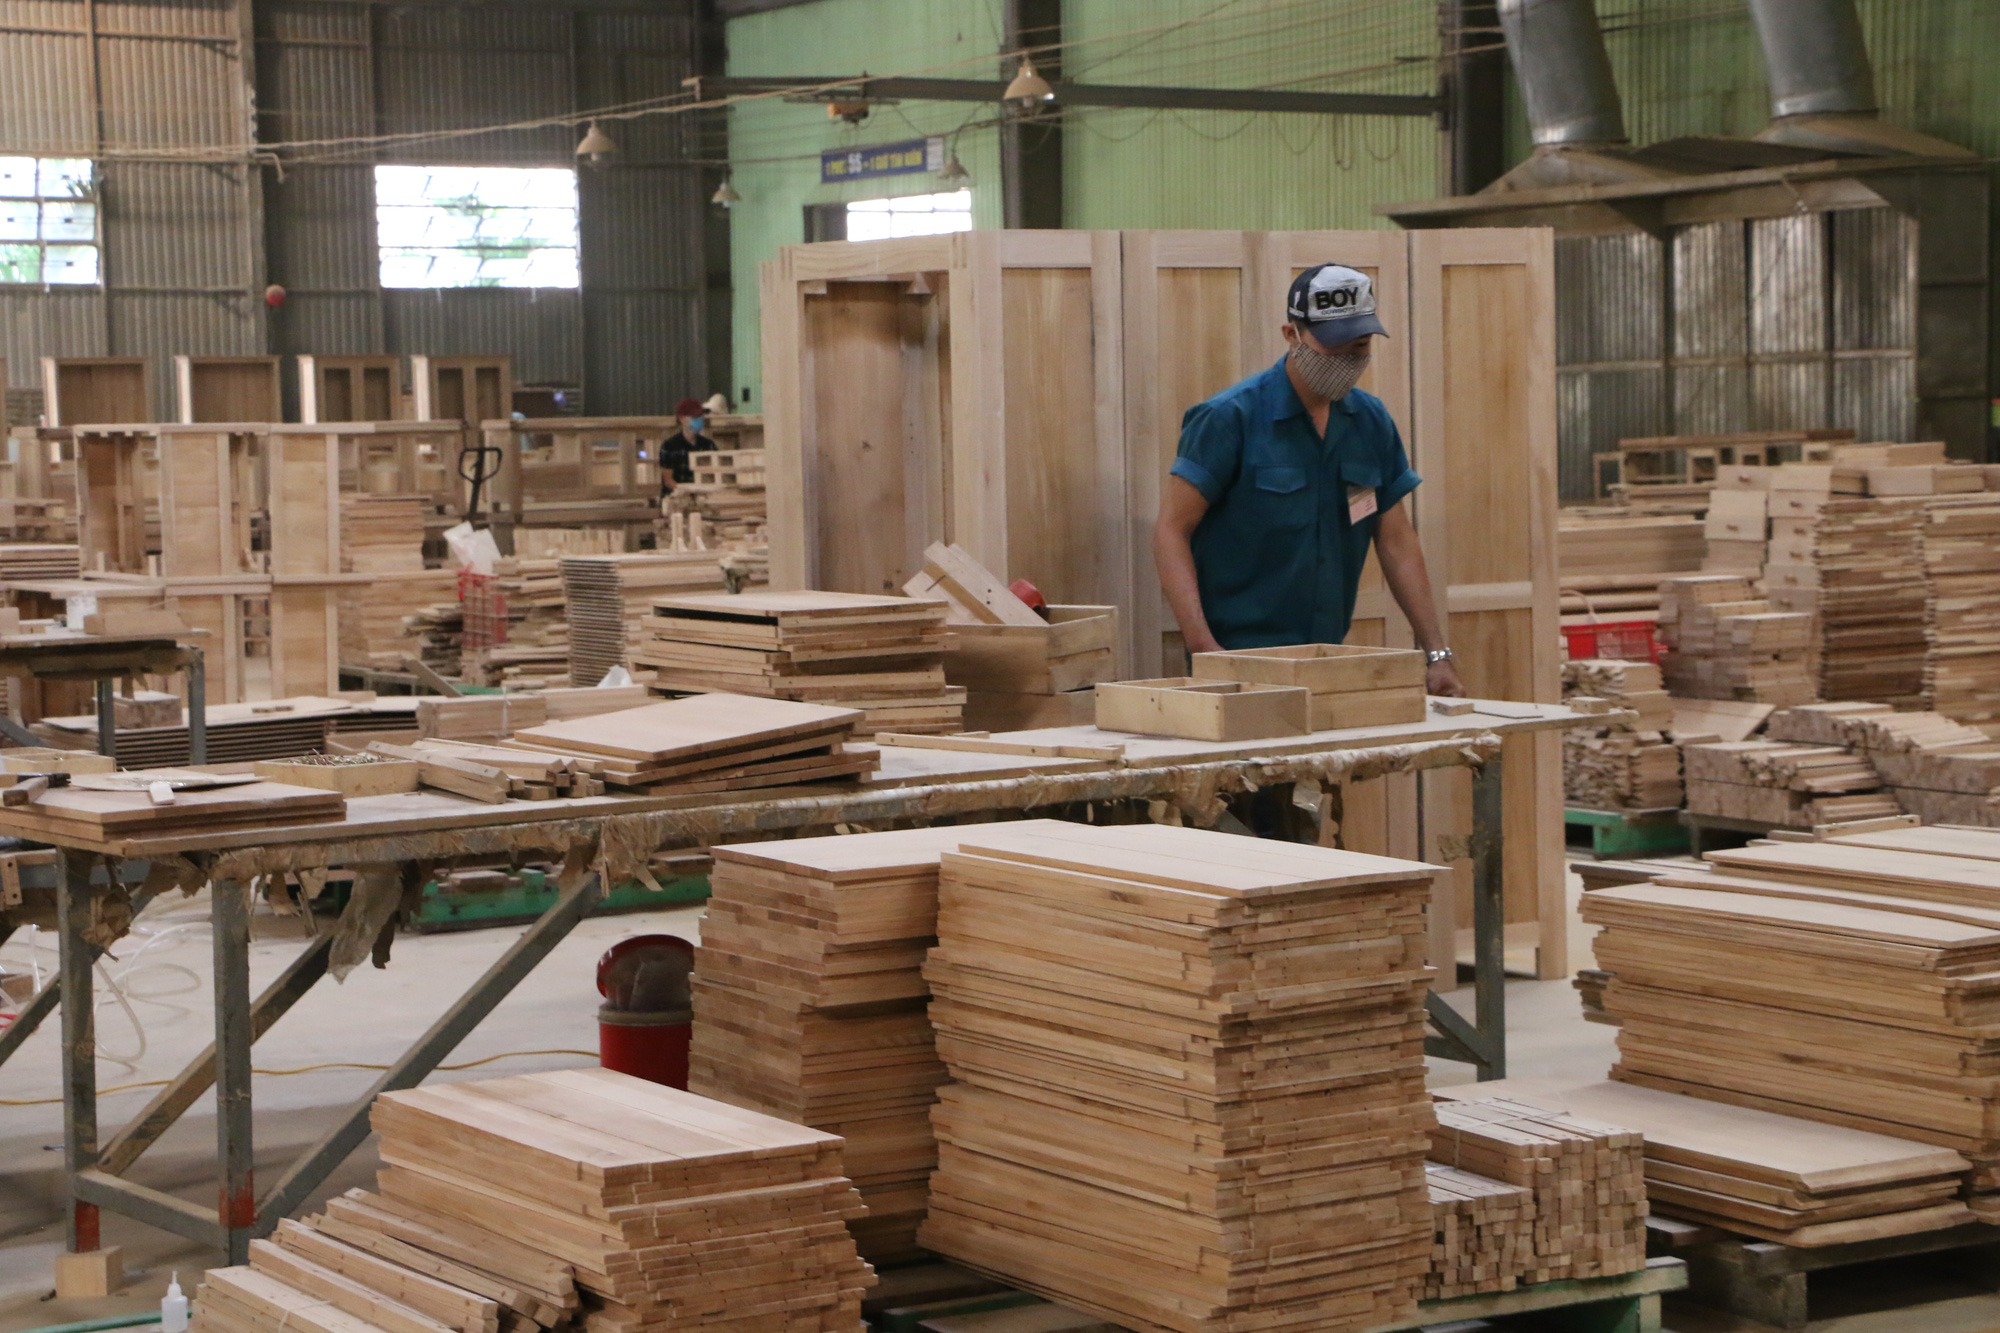 Vietnam’s wood exports face scourge amid COVID-19: official